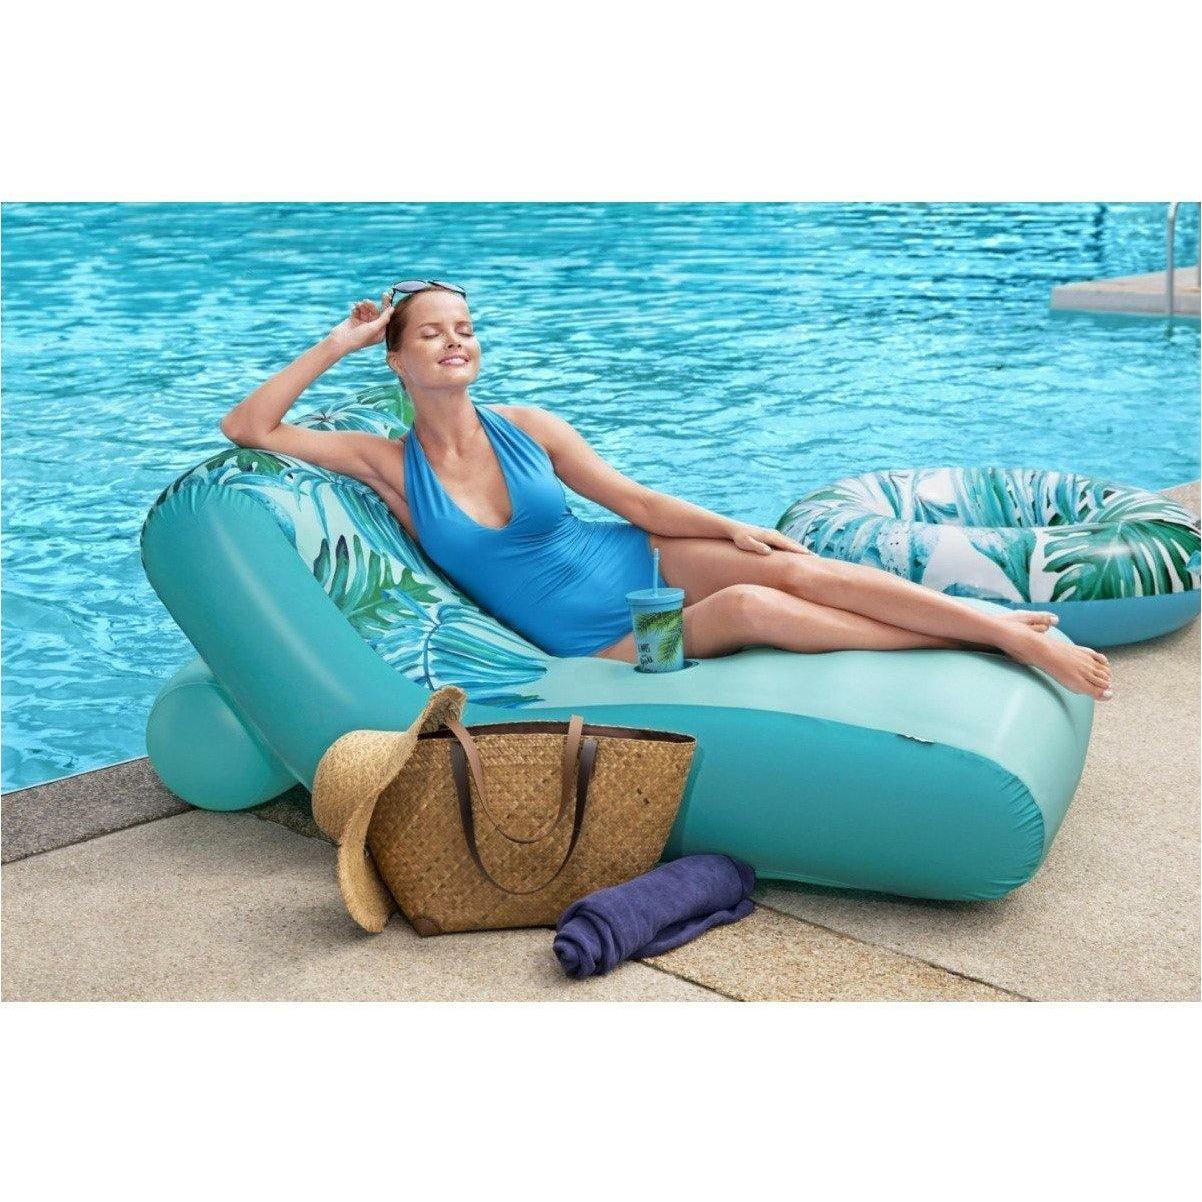 Bestway 43402 Air Mattress Sun Lounger Beach Chair - BumbleToys - 5-7 Years, 8-13 Years, Bestway, Boys, Floaters, Girls, Pre-Order, Sand Toys Pools & Inflatables